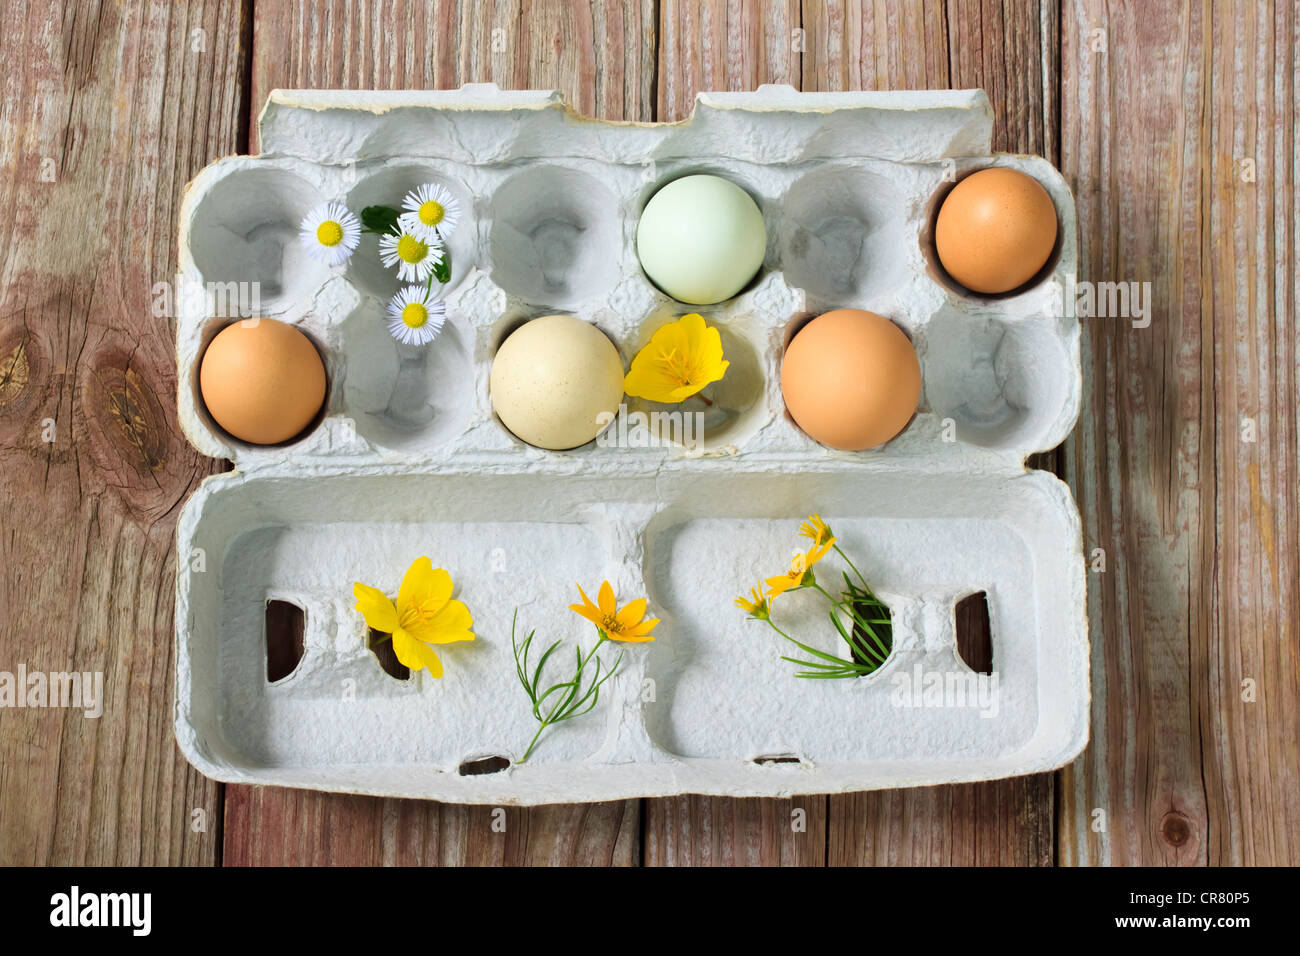 Organic colorful eggs with small flowers Stock Photo